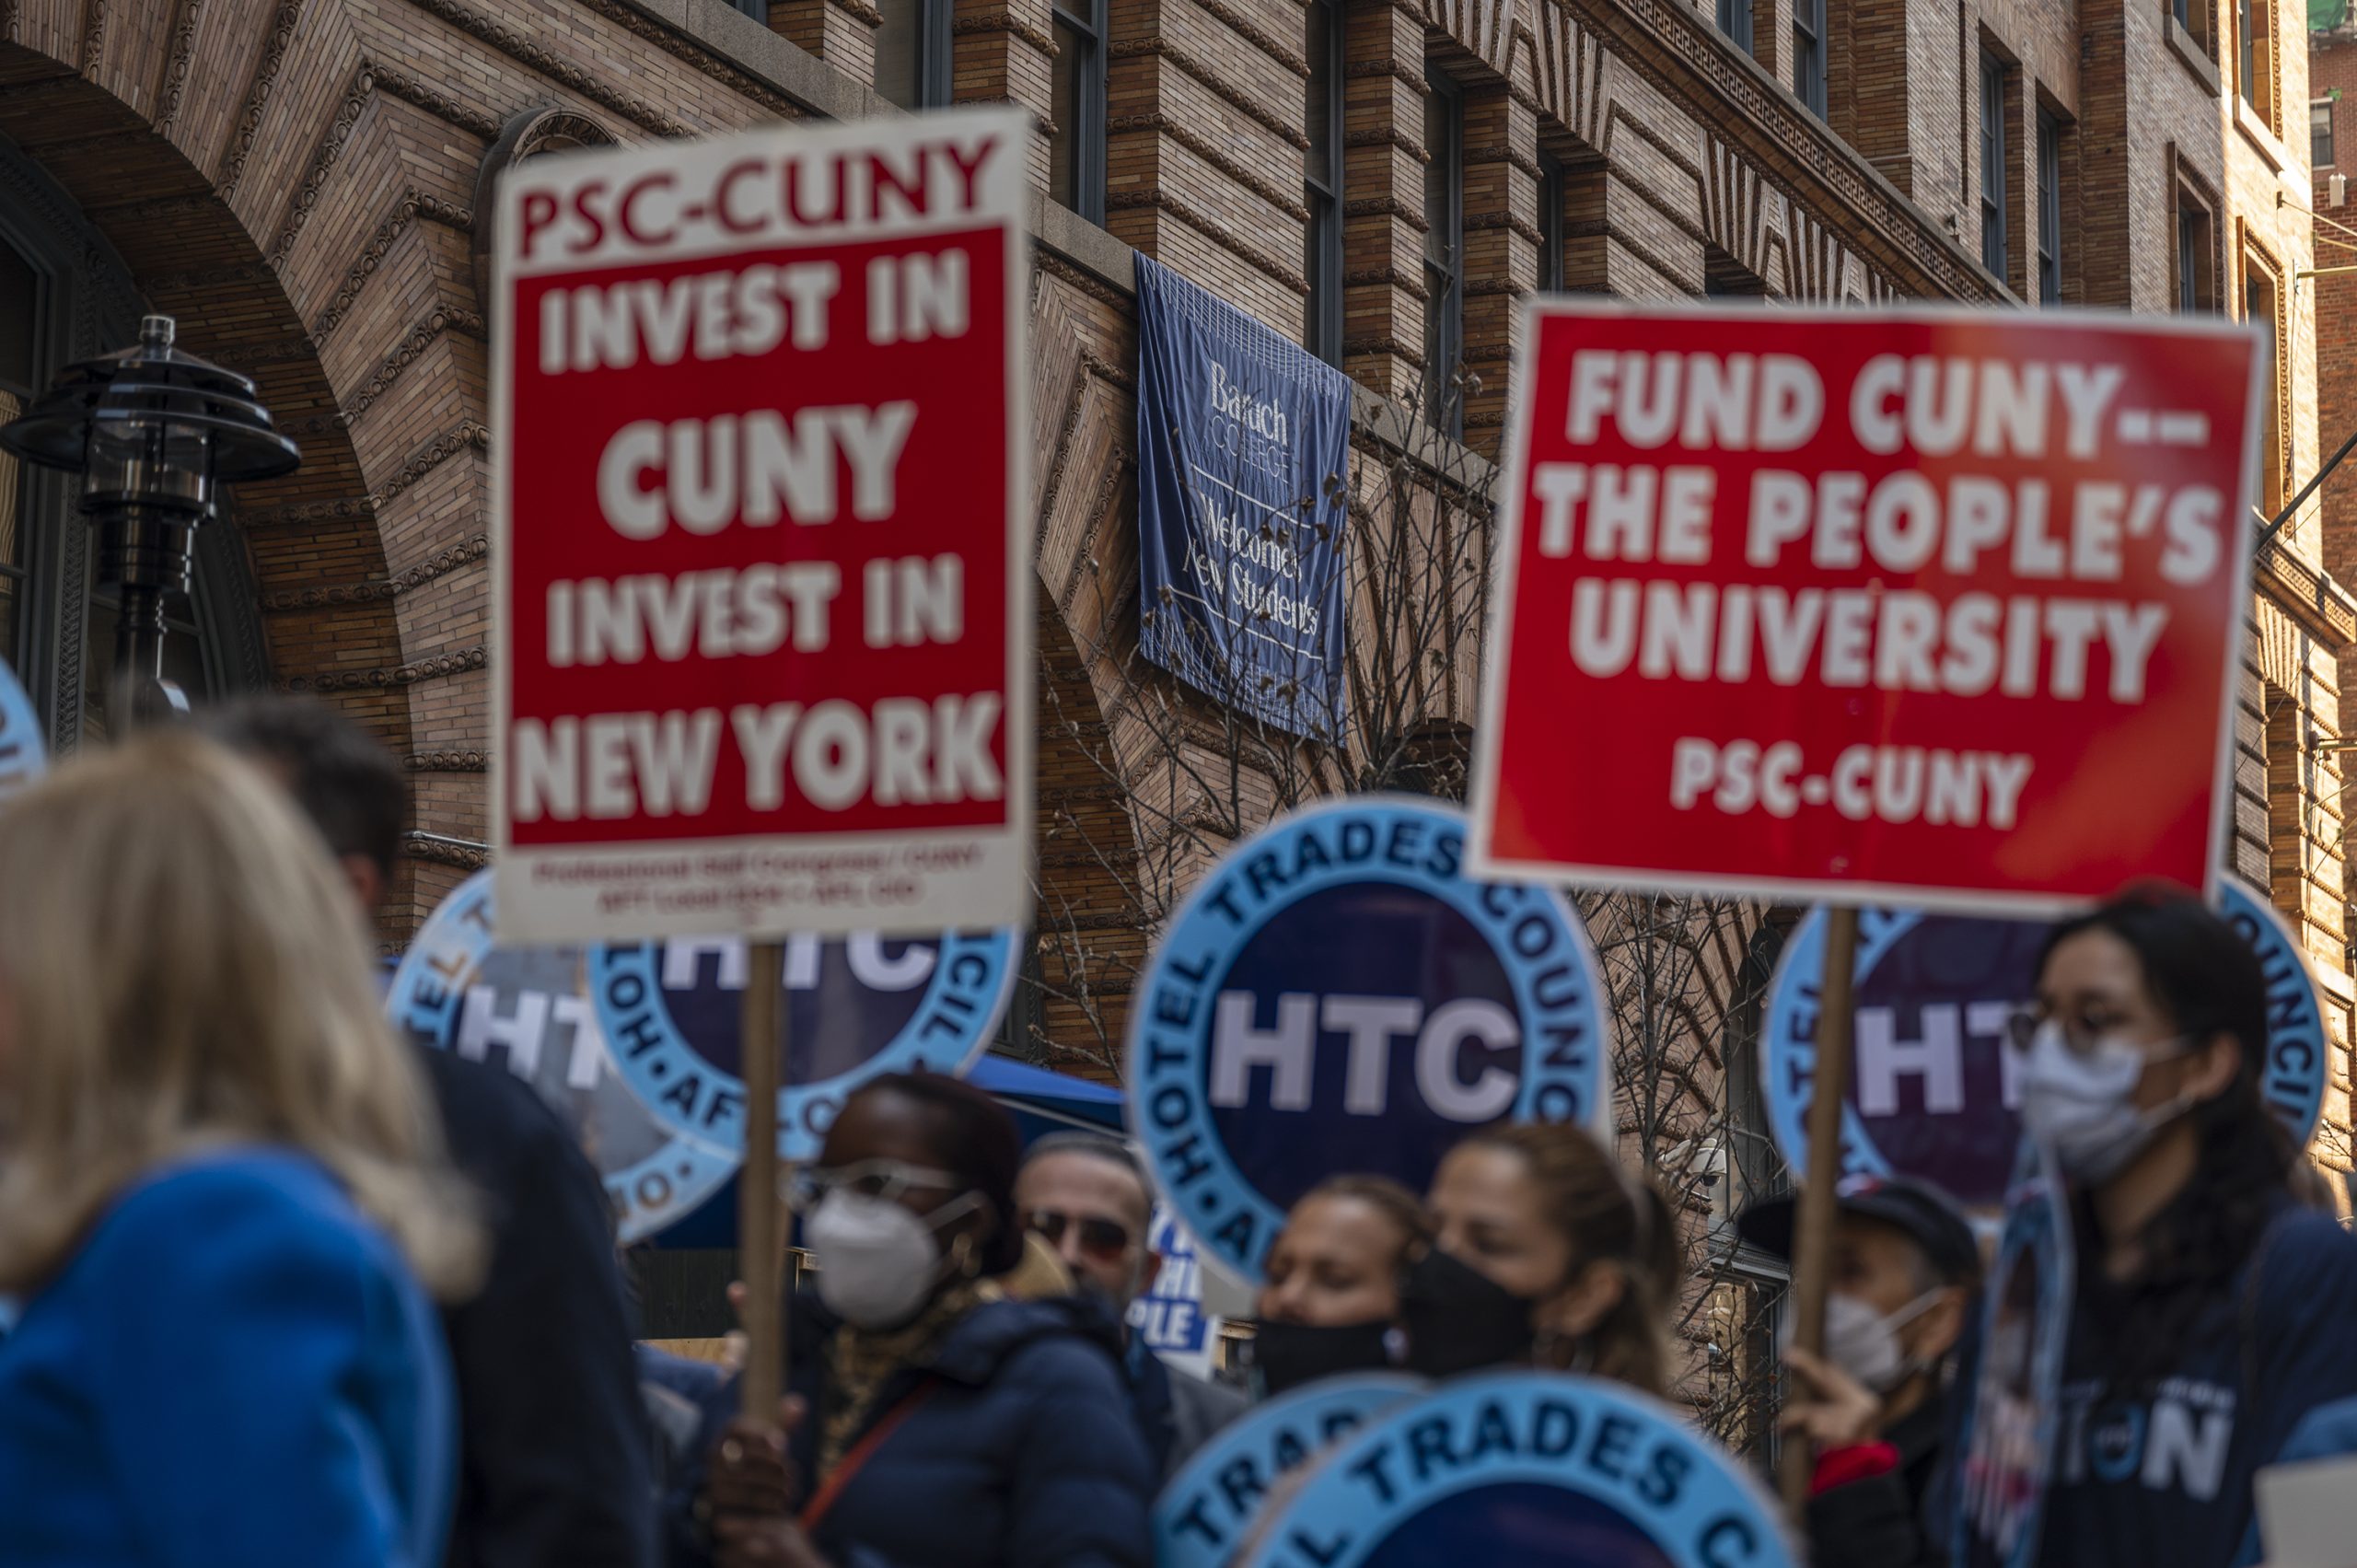 CUNY faculty union members rally outside Baruch College for free in-state tuition.